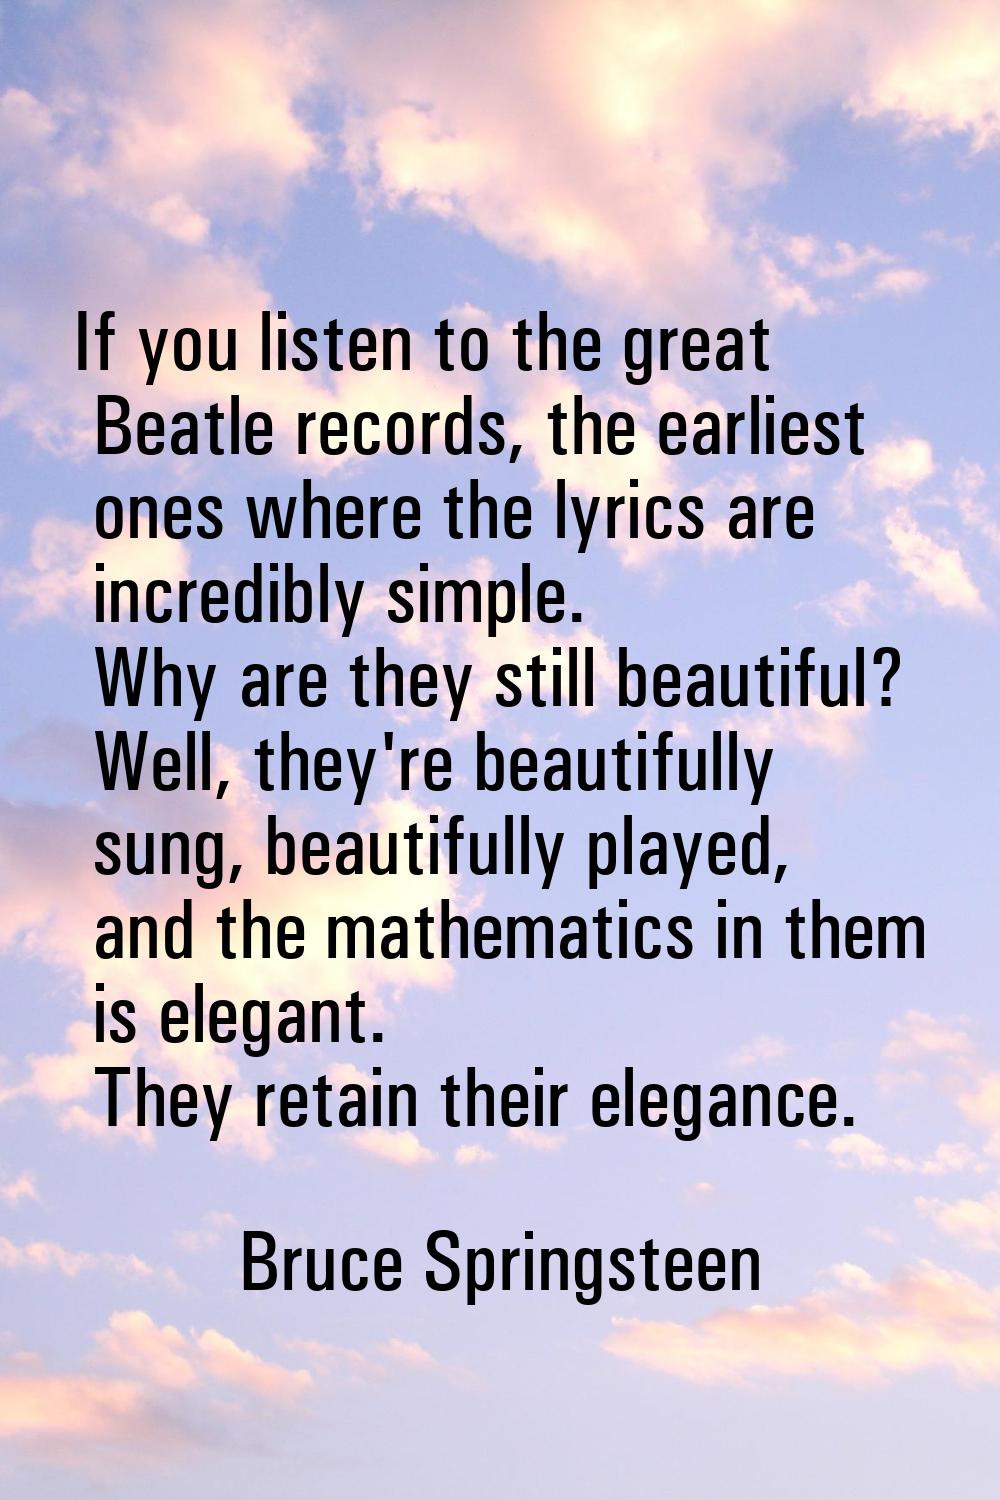 If you listen to the great Beatle records, the earliest ones where the lyrics are incredibly simple